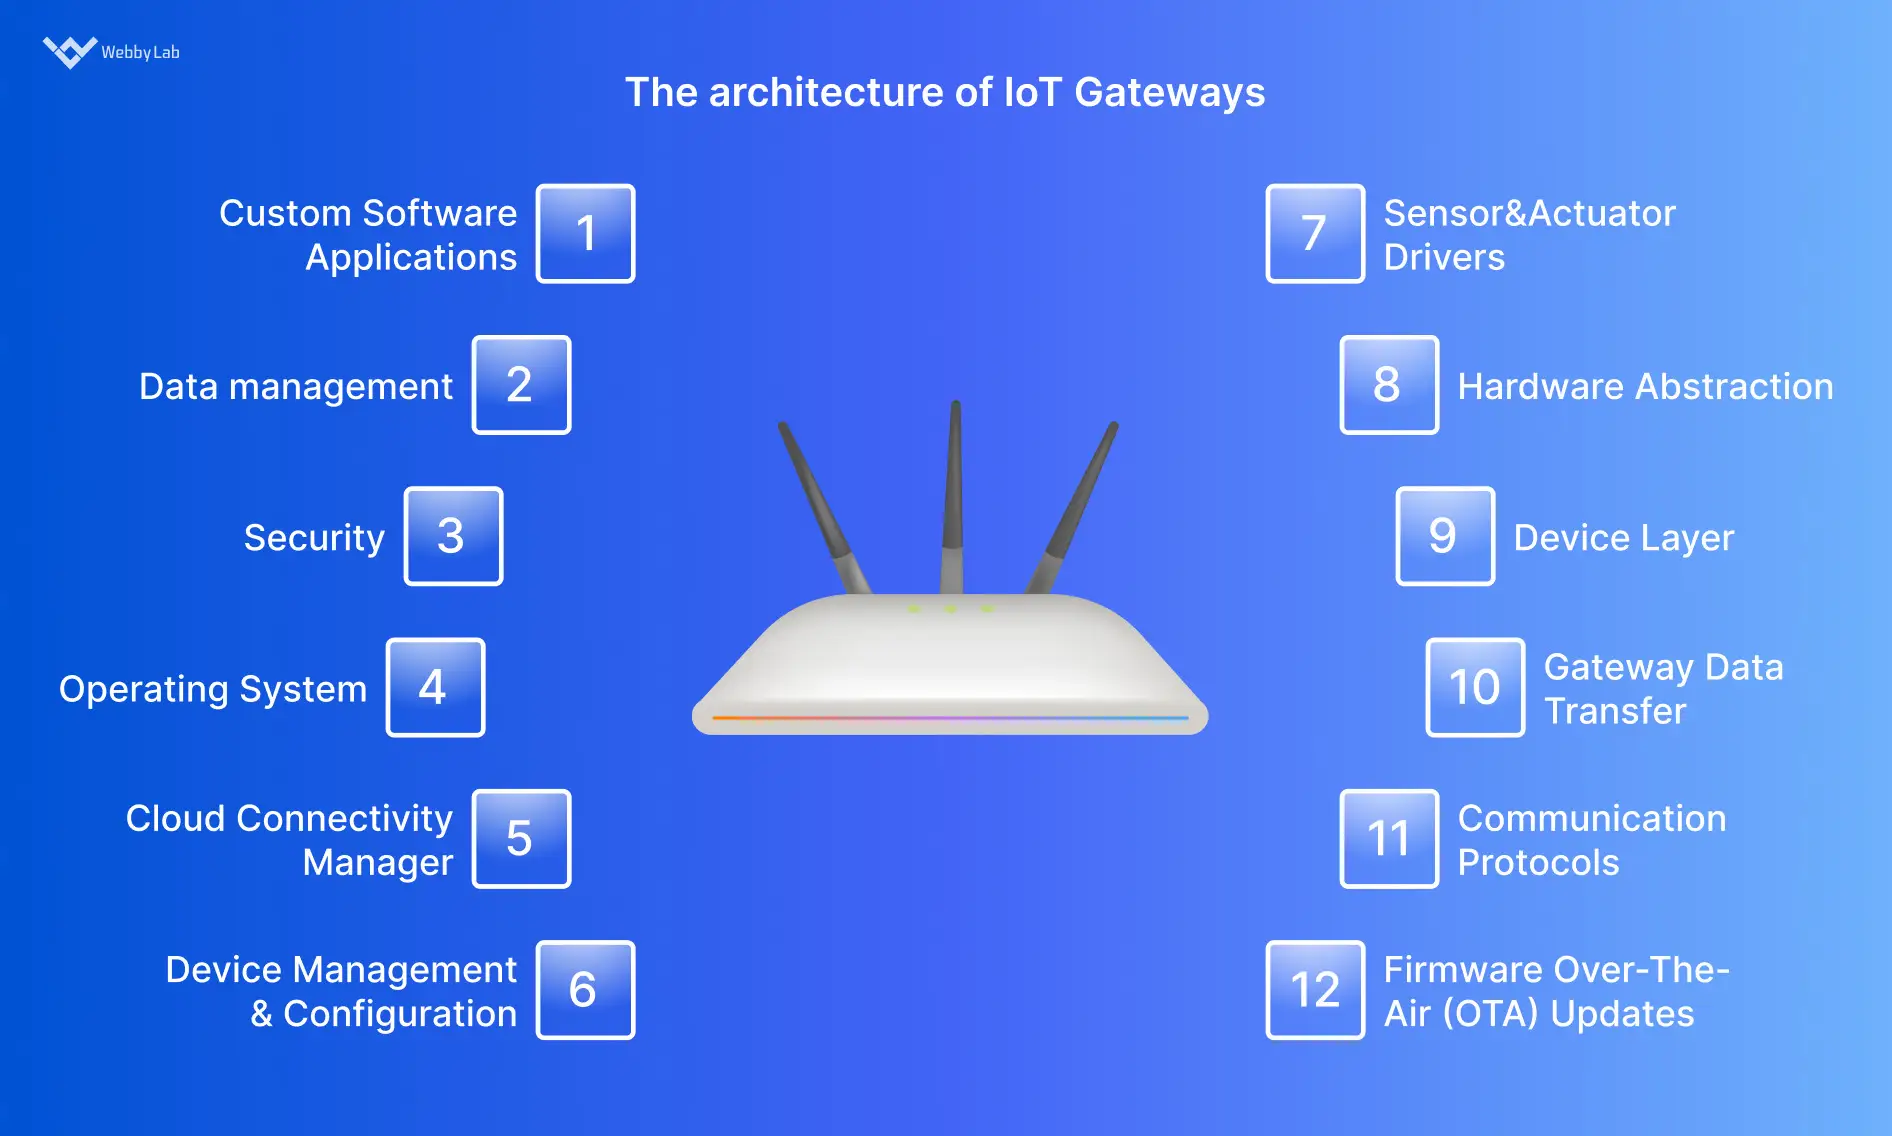 The architecture of IoT gateways.